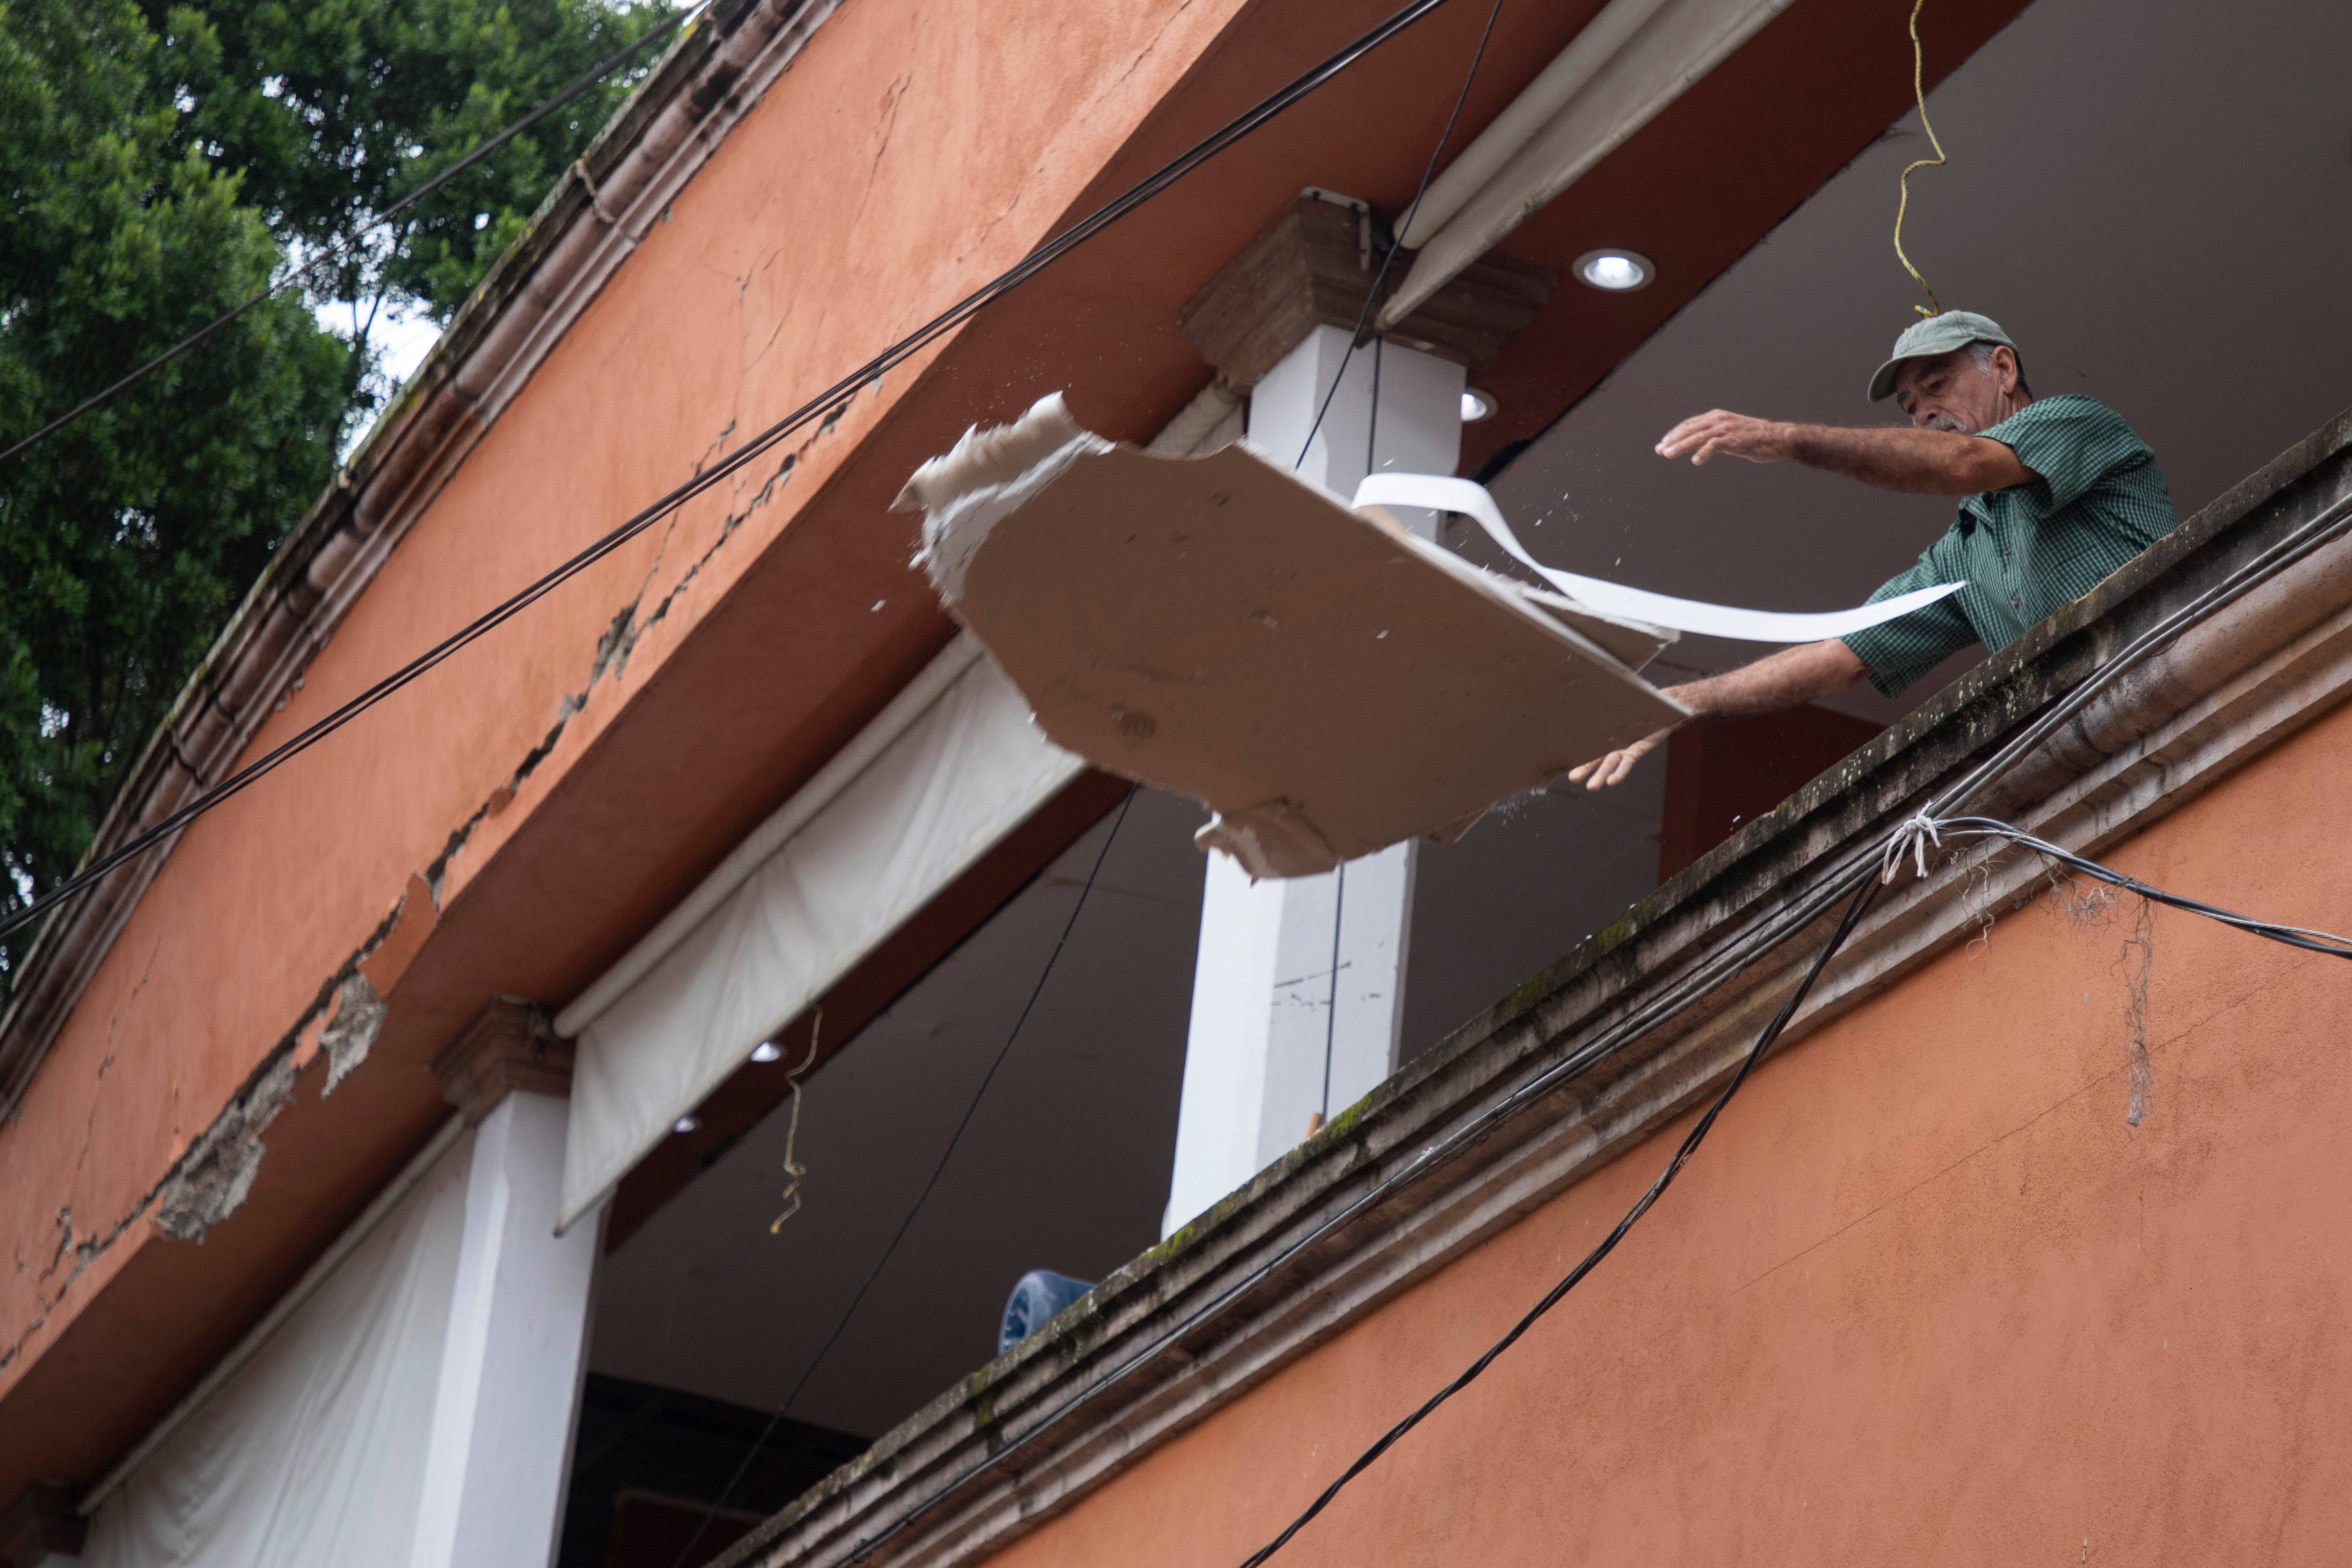 A resident tosses materials from a building damaged by the previous day's earthquake in Coalcoman, Michoacan state, Mexico, Tuesday, Sept. 20, 2022